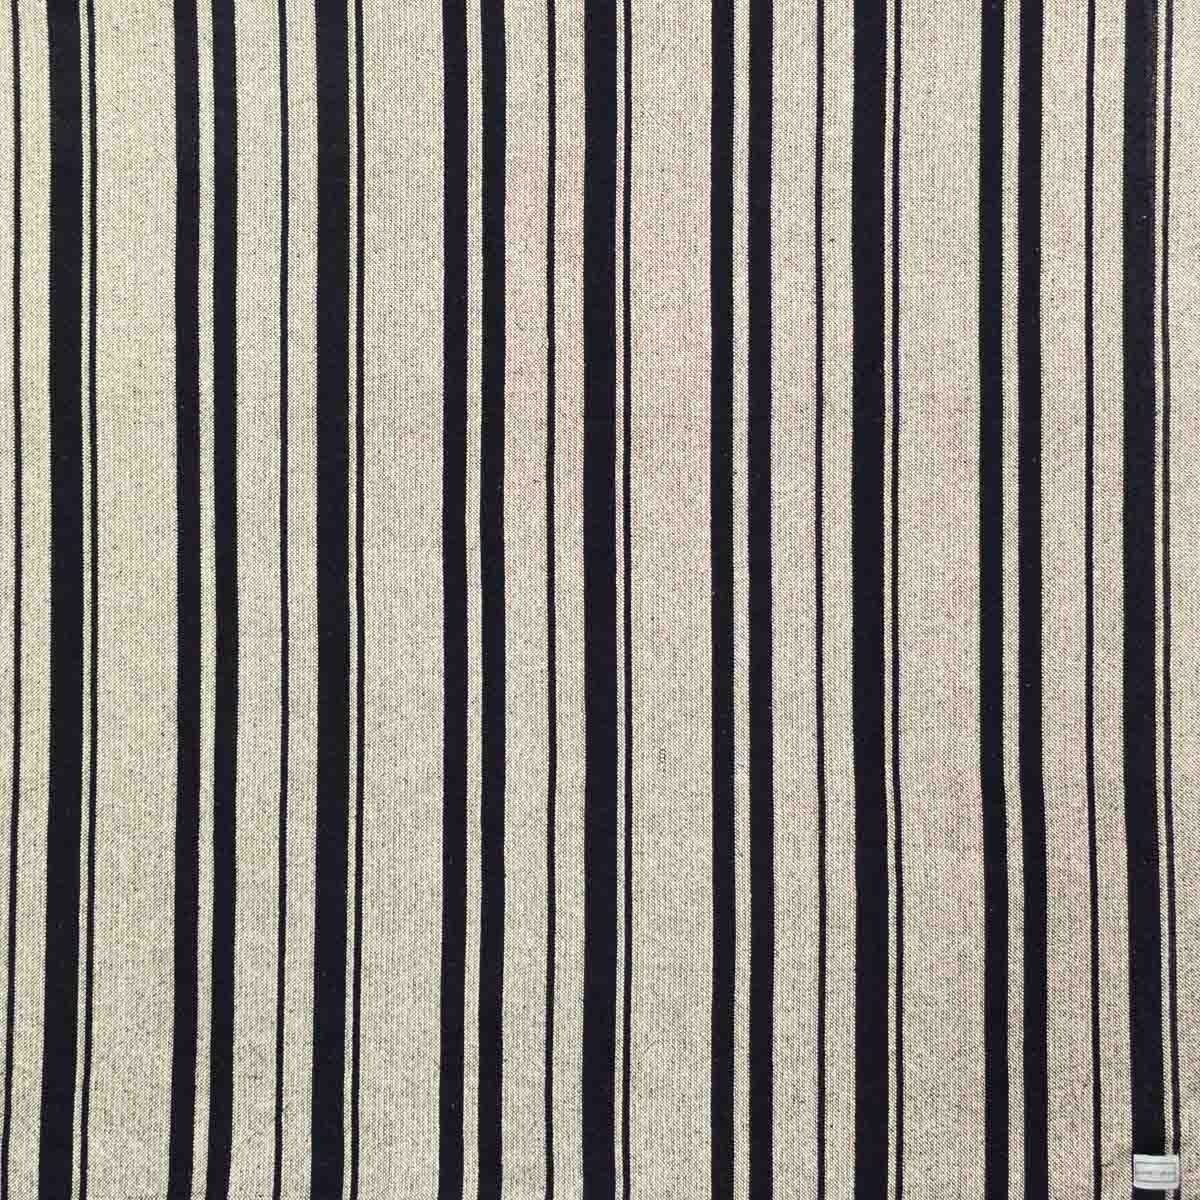 Cotton throw blanket with sand and black stripes.